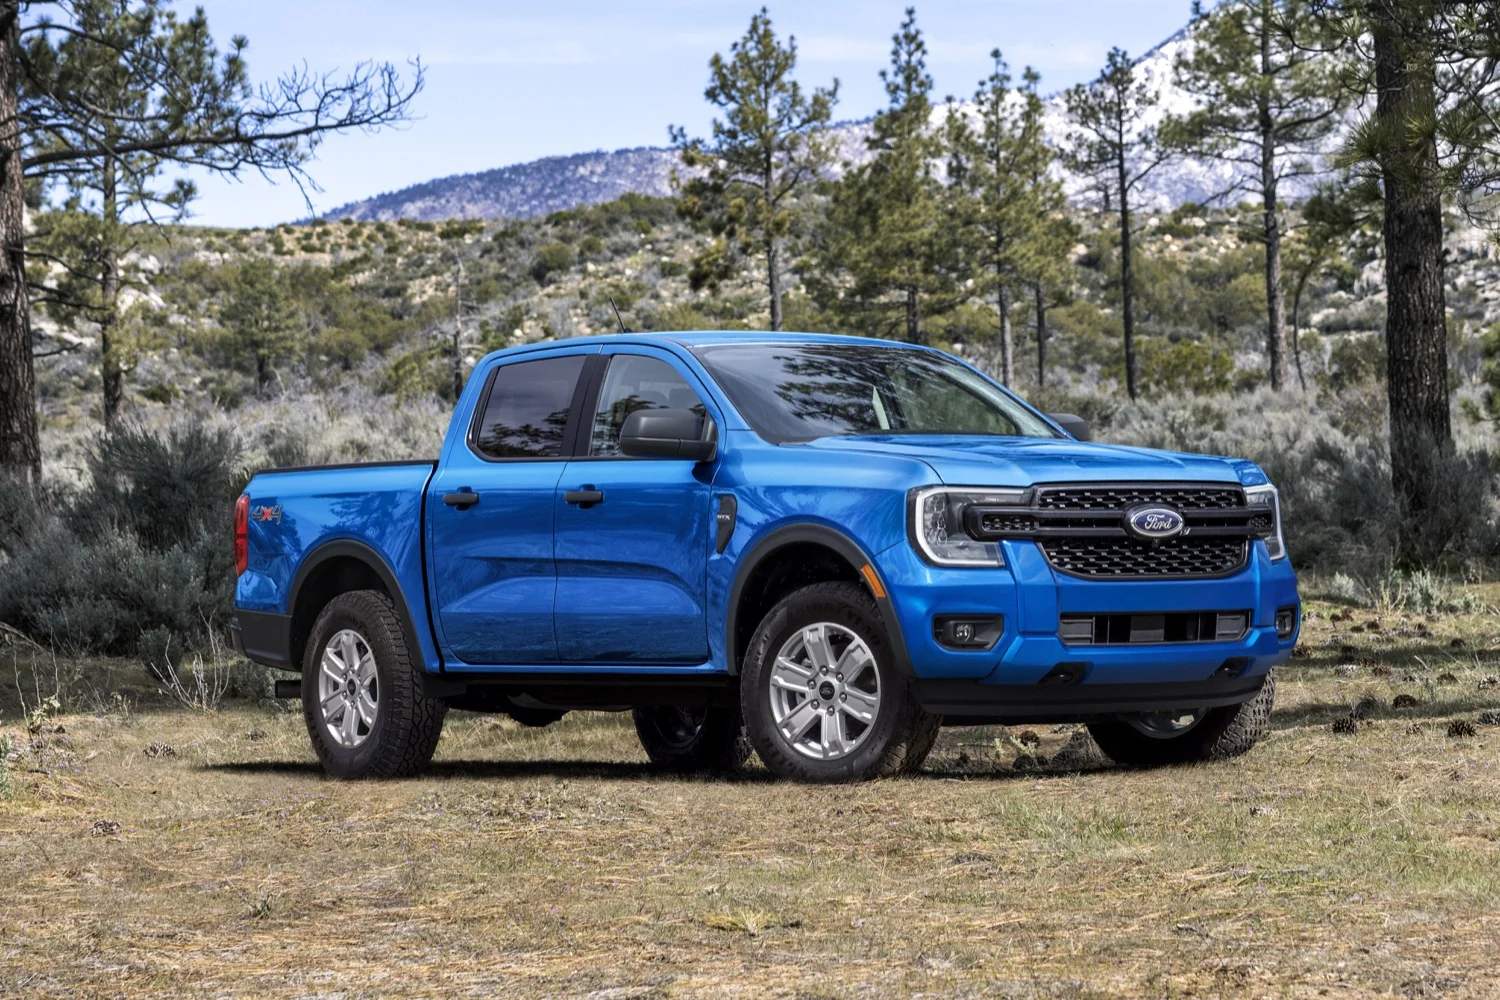 You can now have the Ford Ranger as a plug-in hybrid pickup